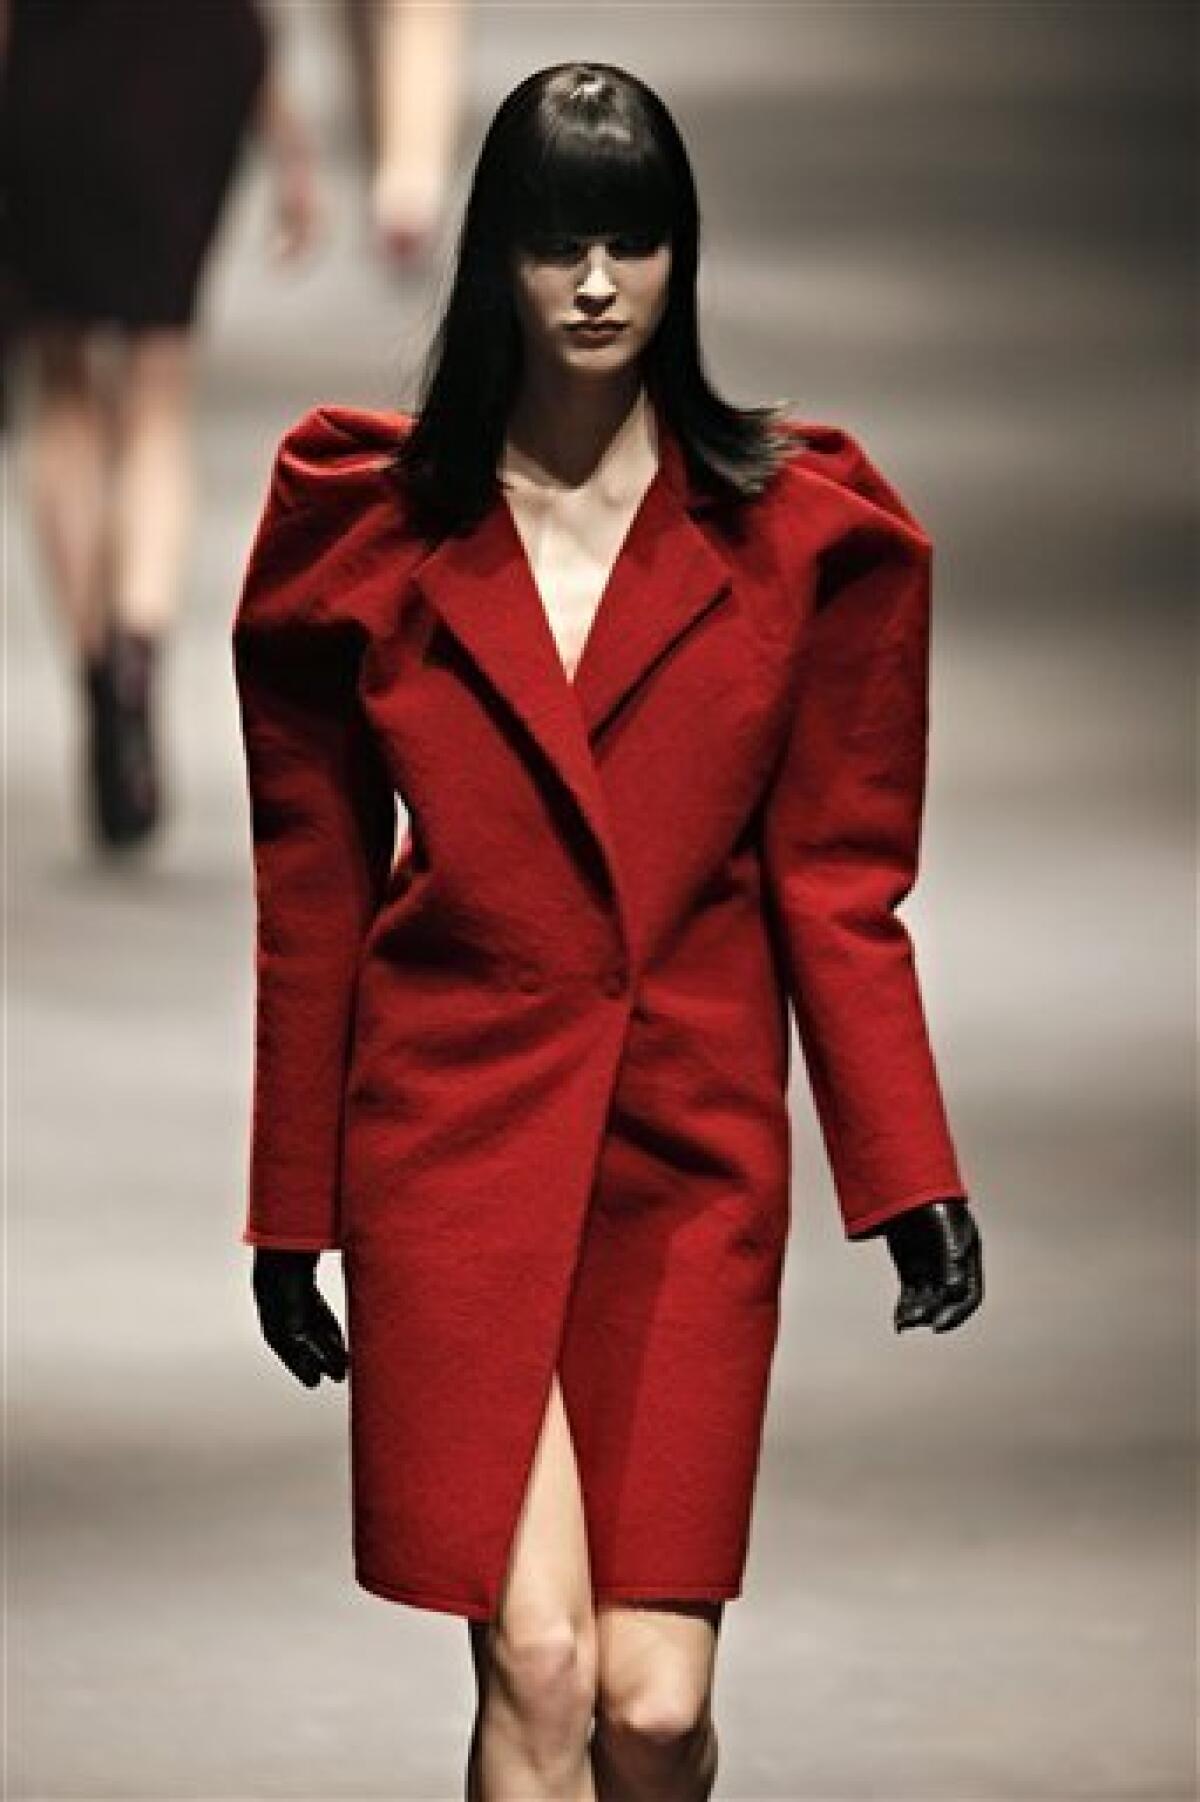 Red Pant Special at Fashion Week - Sydne Style